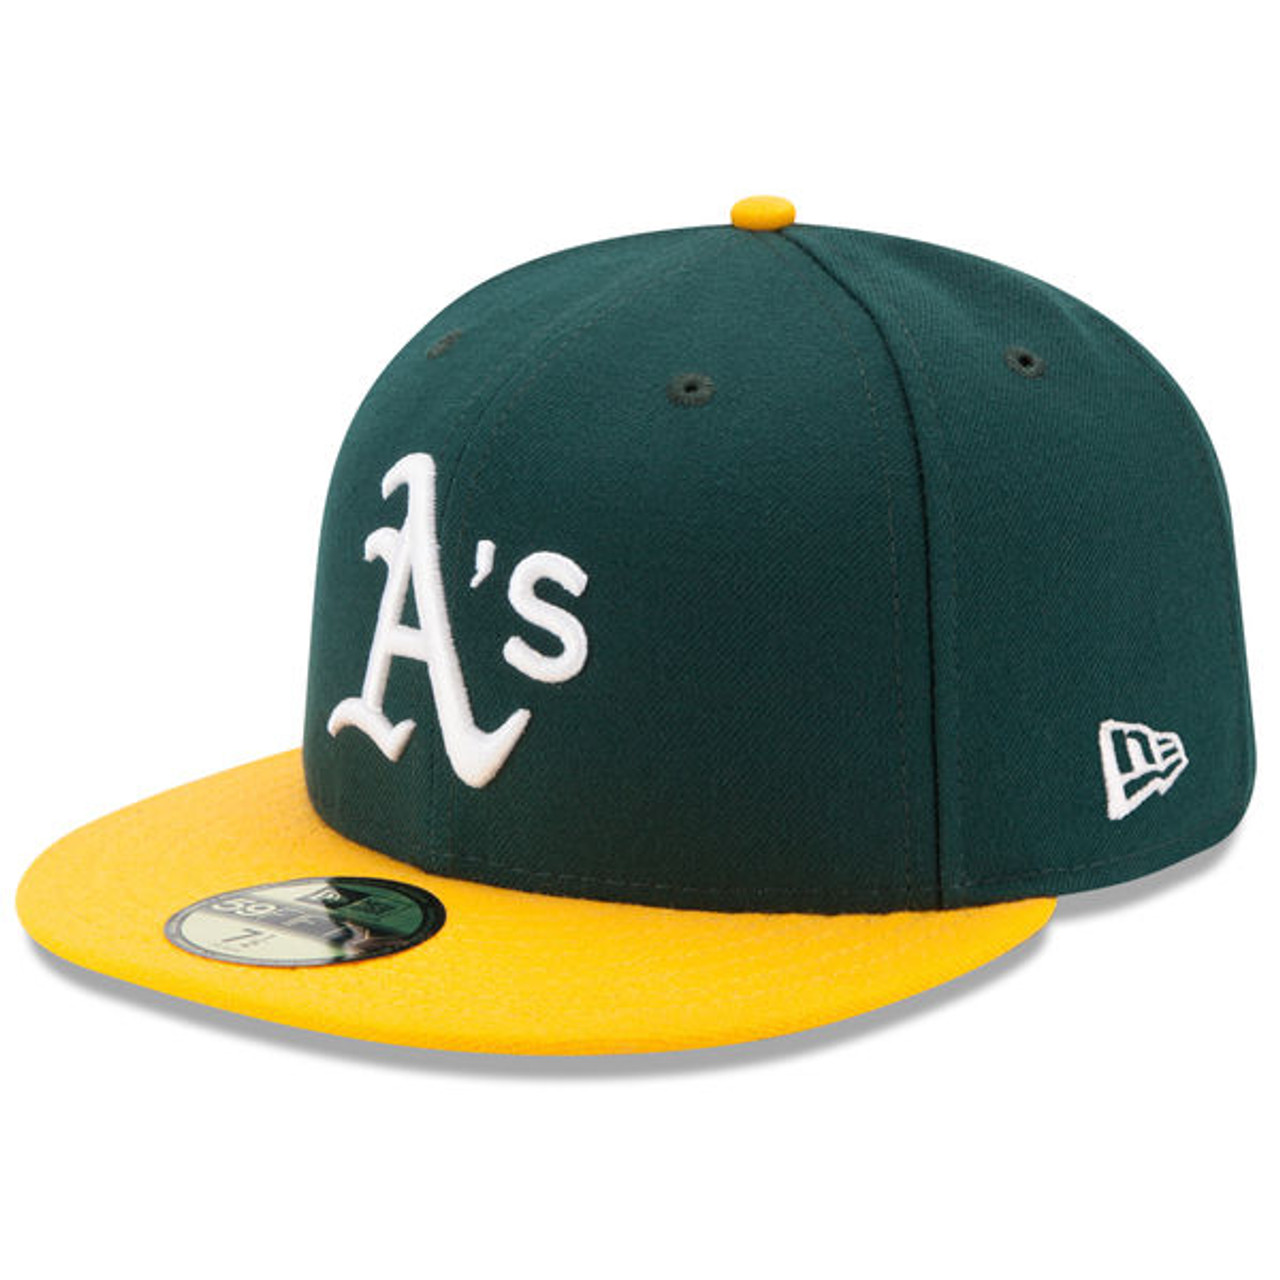 Oakland Athletics New Era Green Undervisor 59FIFTY Fitted Hat - Light  Blue/Navy